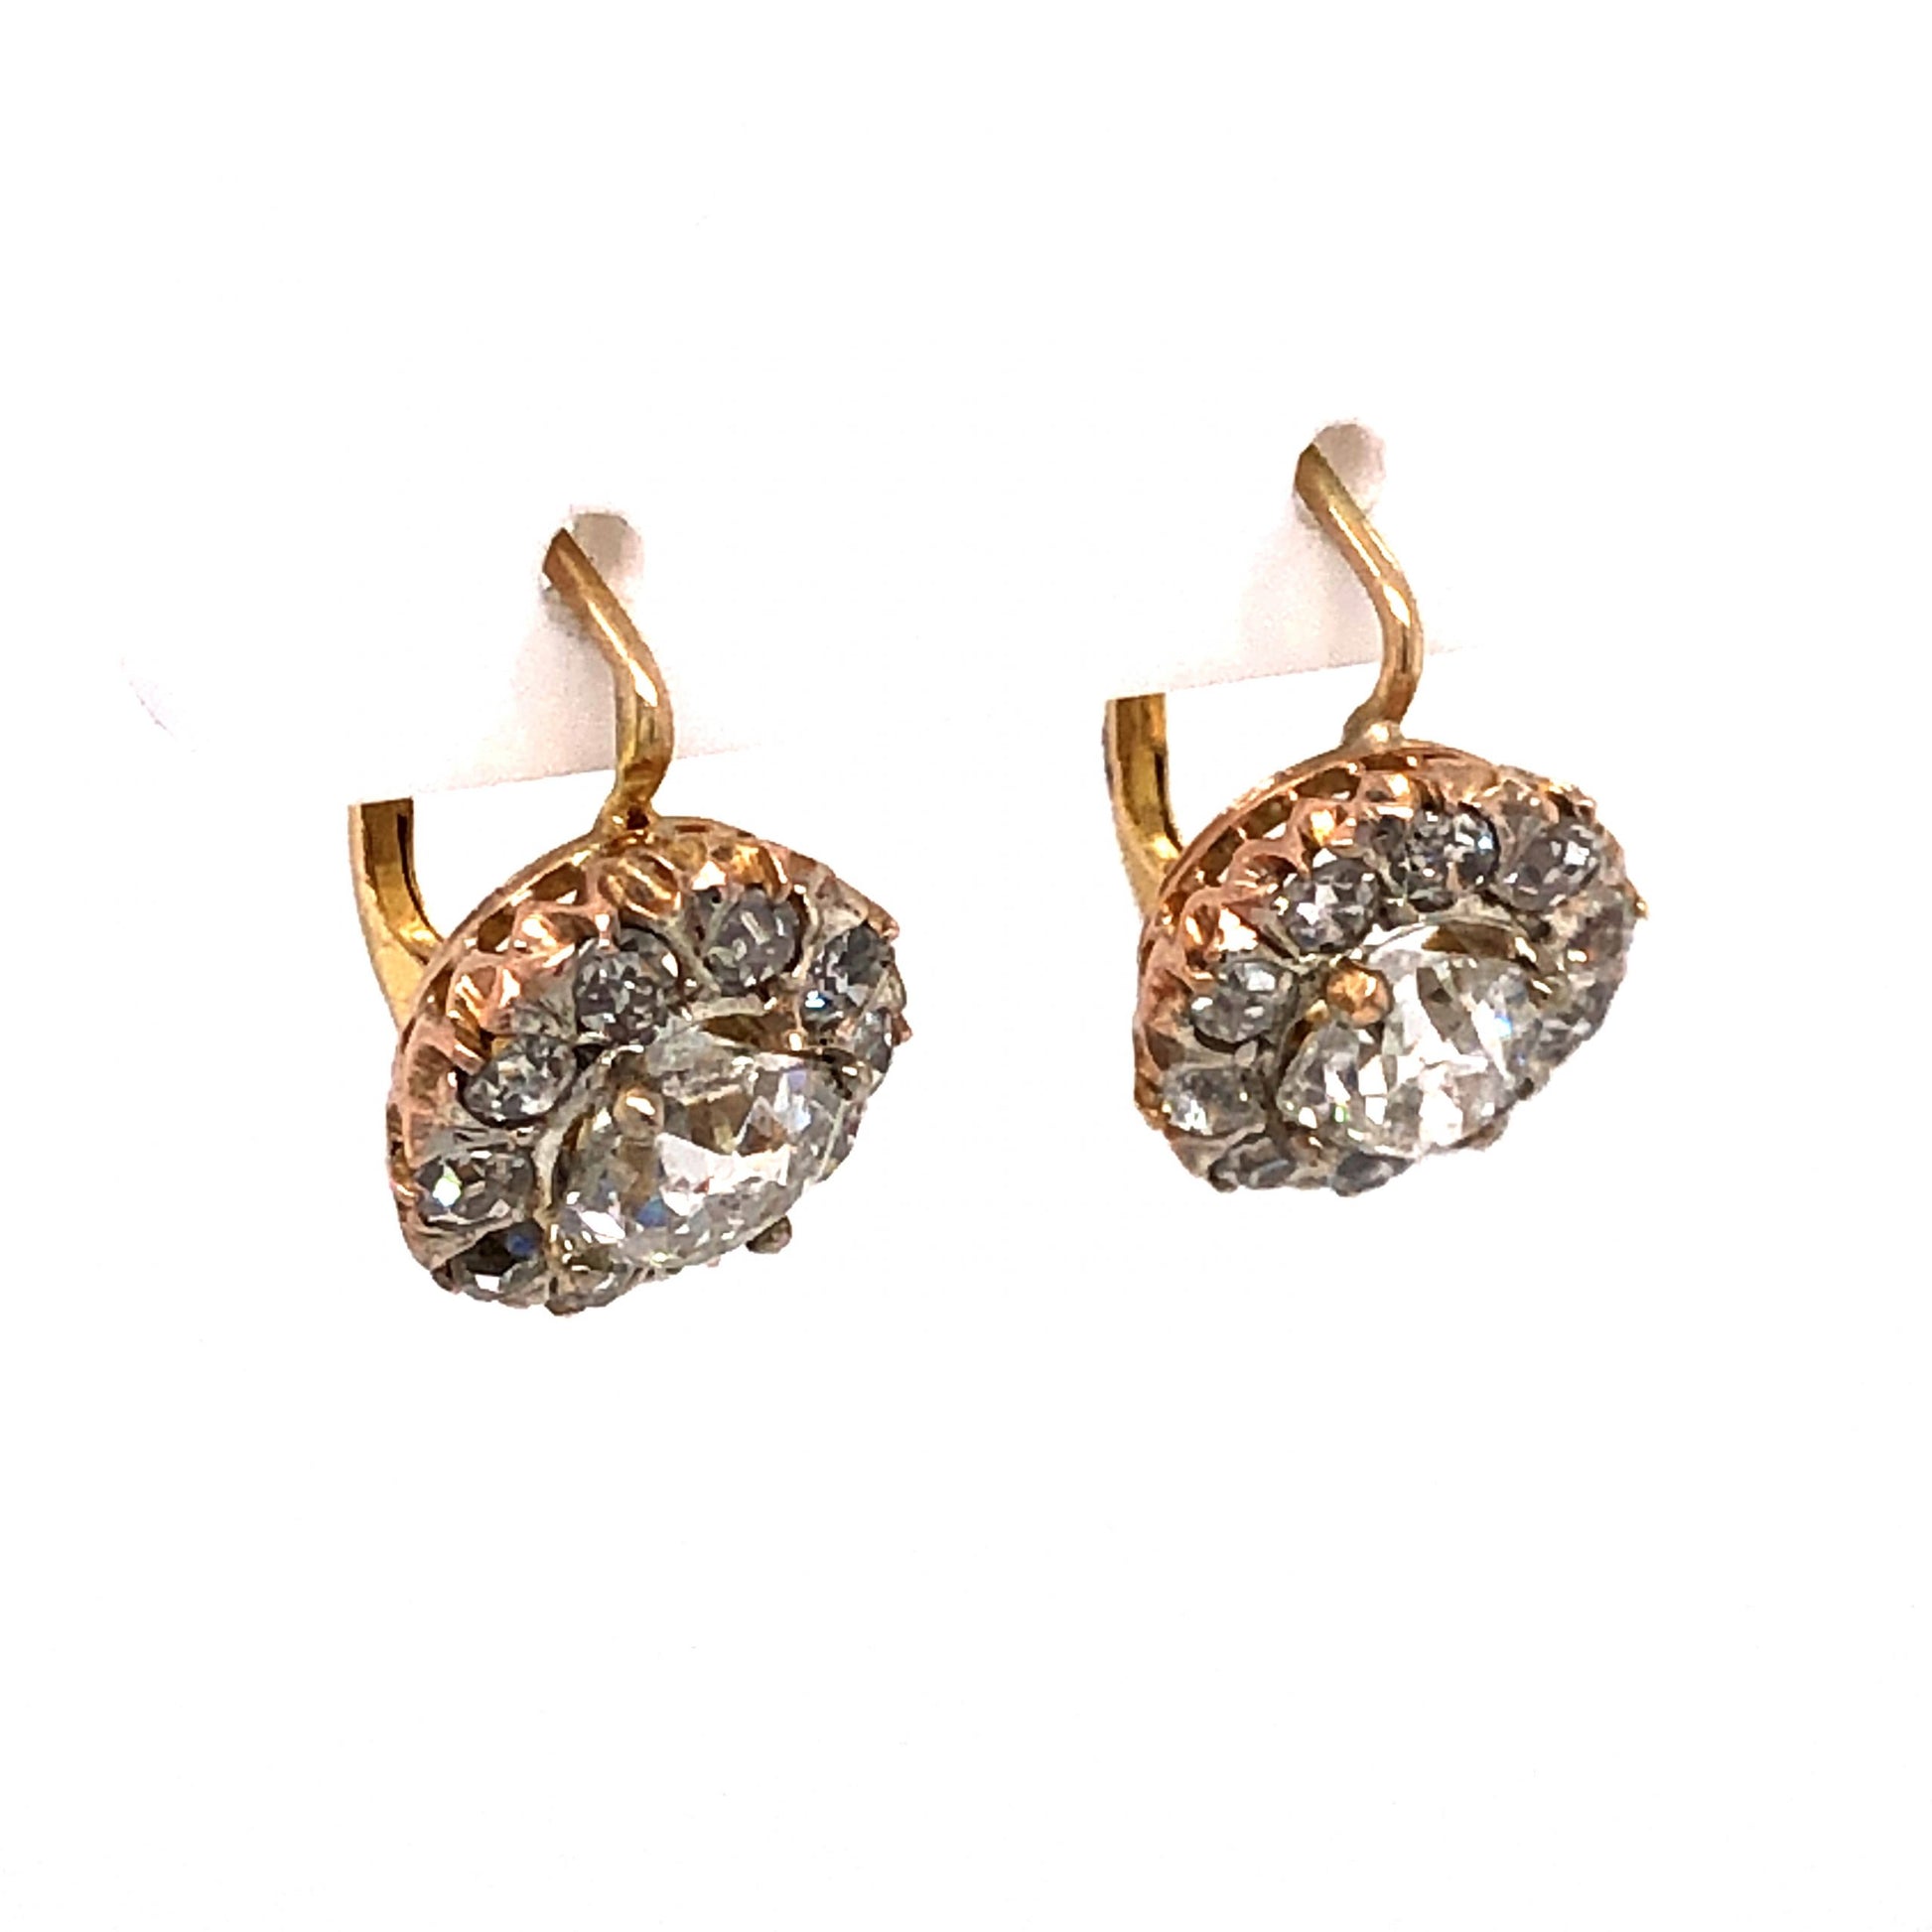 2.48 Victorian Old Mine Cut Diamond Earrings in 14k Gold and Silver